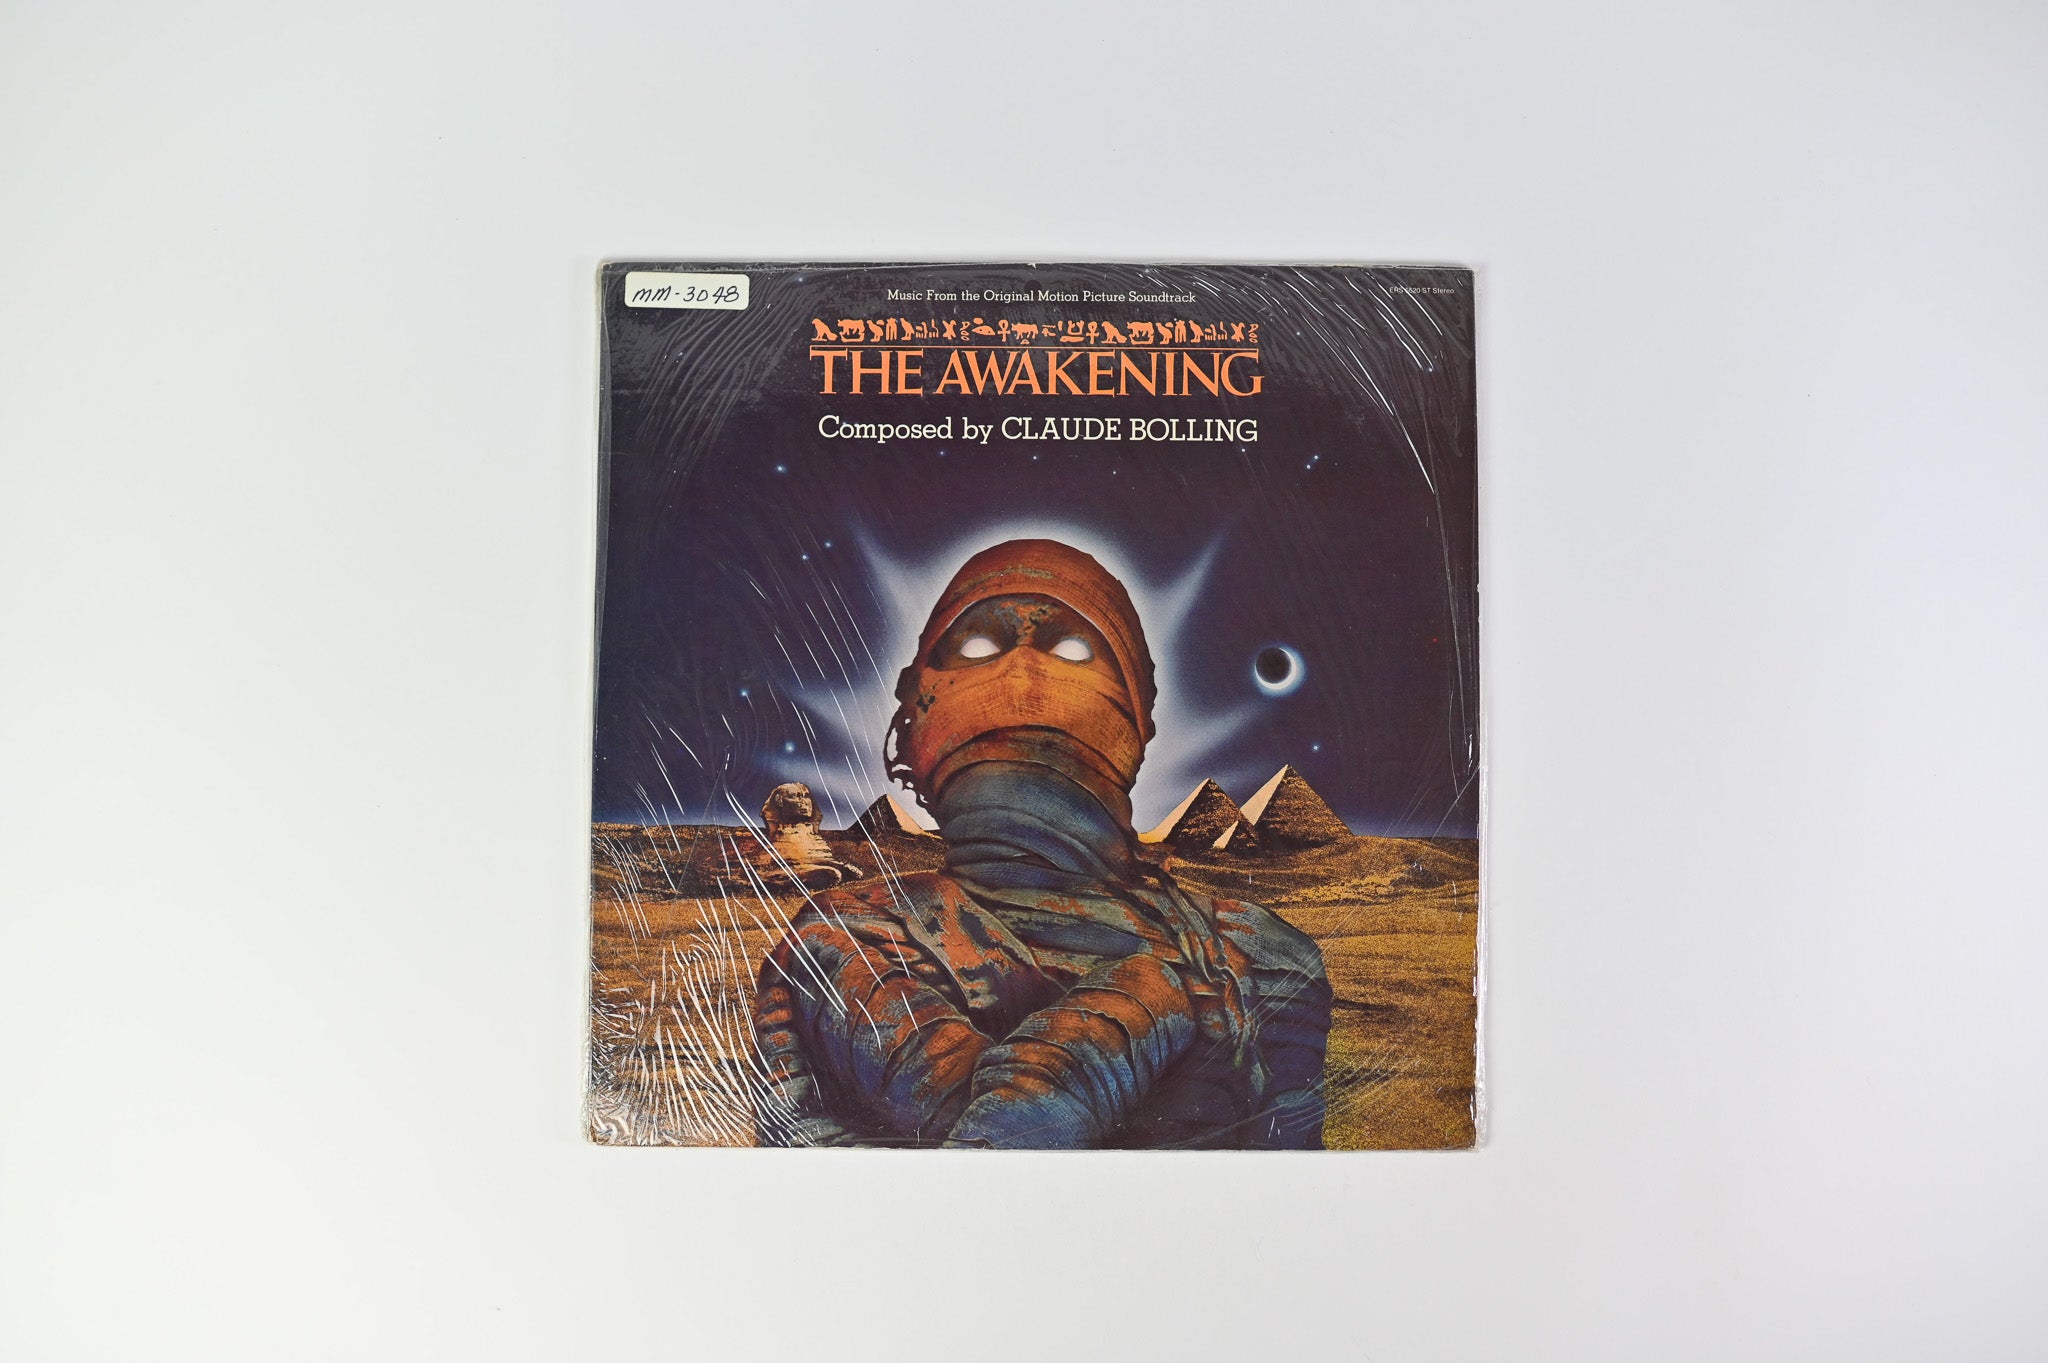 Claude Bolling - The Awakening (Music From the Soundtrack) on Entr'Acte Sealed